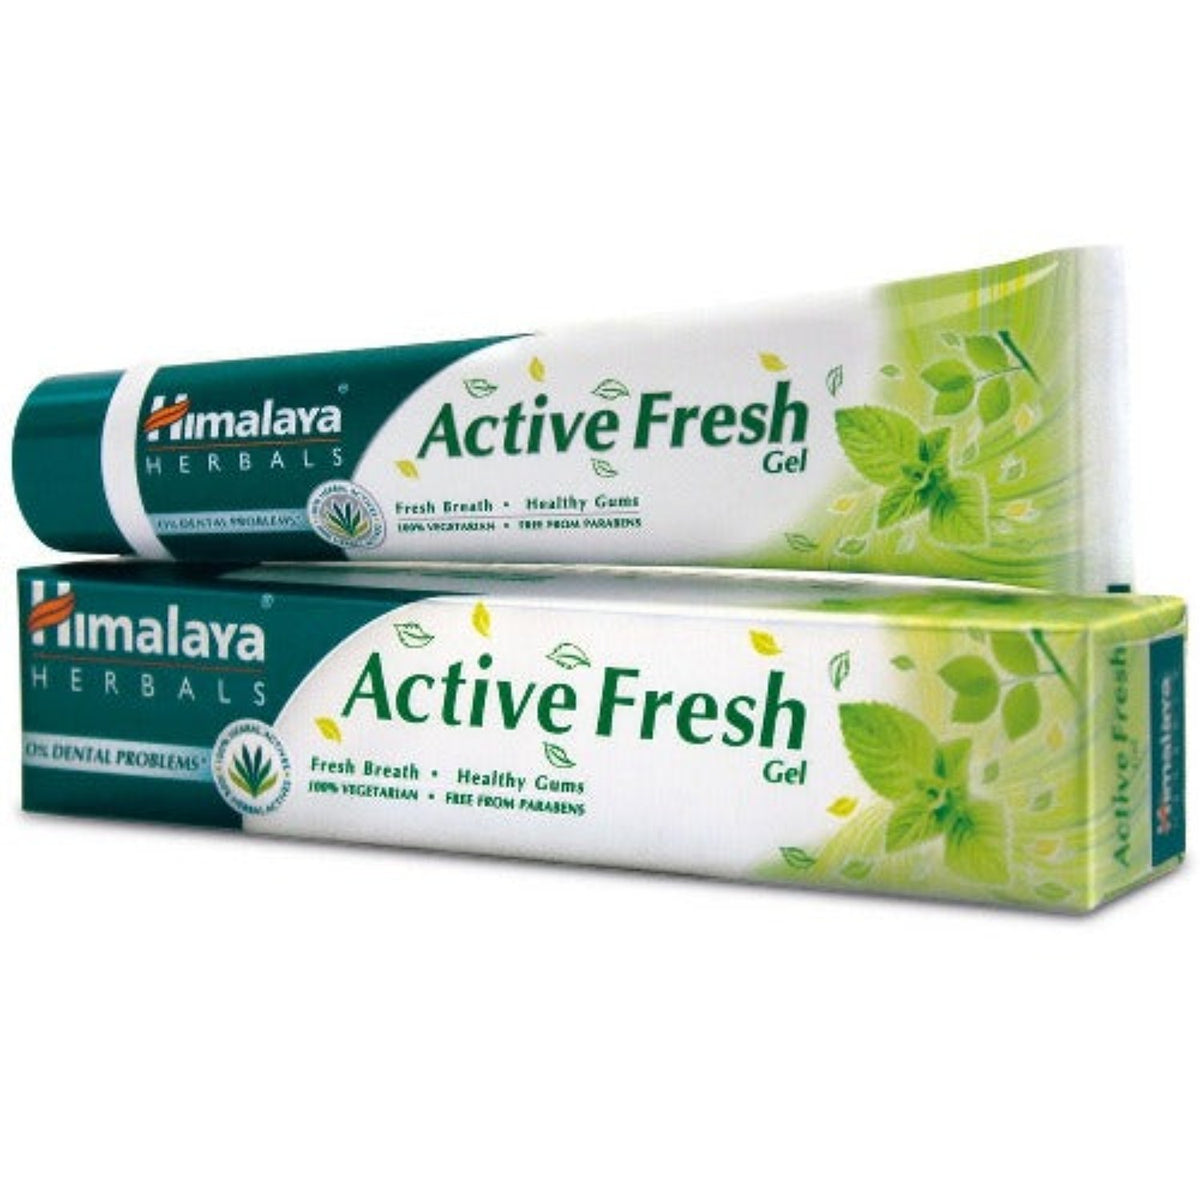 Himalaya Herbal Ayurvedic Personal Care Active Fresh For a Fresh Feel Gel Toothpaste 80g